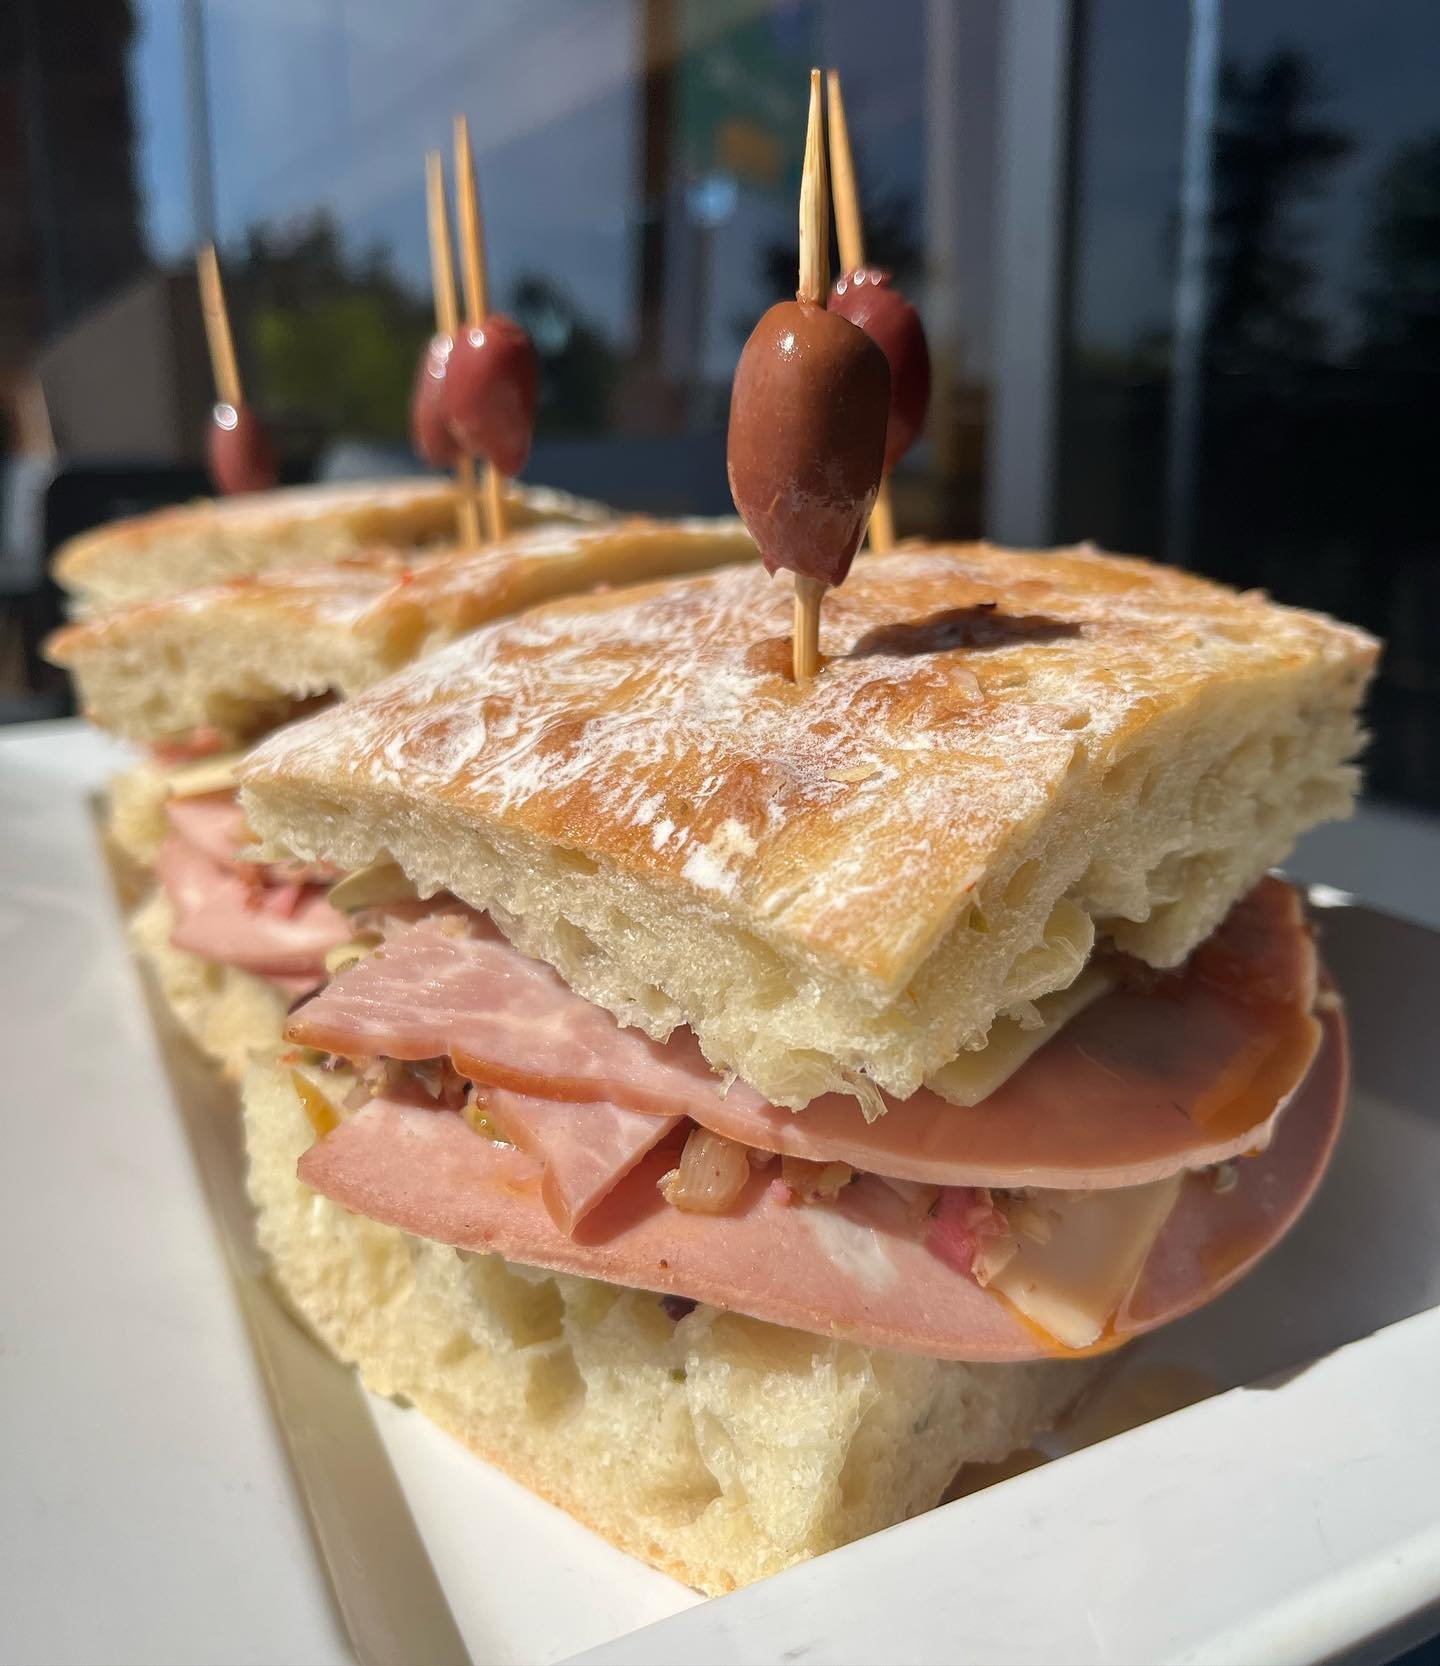 Give it up for our SW Barbur location&rsquo;s new specialty sandwich: the Muffuletta! 😋 That&rsquo;s right, we brought the Sicilian New Orleans favorite right here to SW Portland. We took 3 kinds of meat- mortadella, Genoa salami and ham, topped the